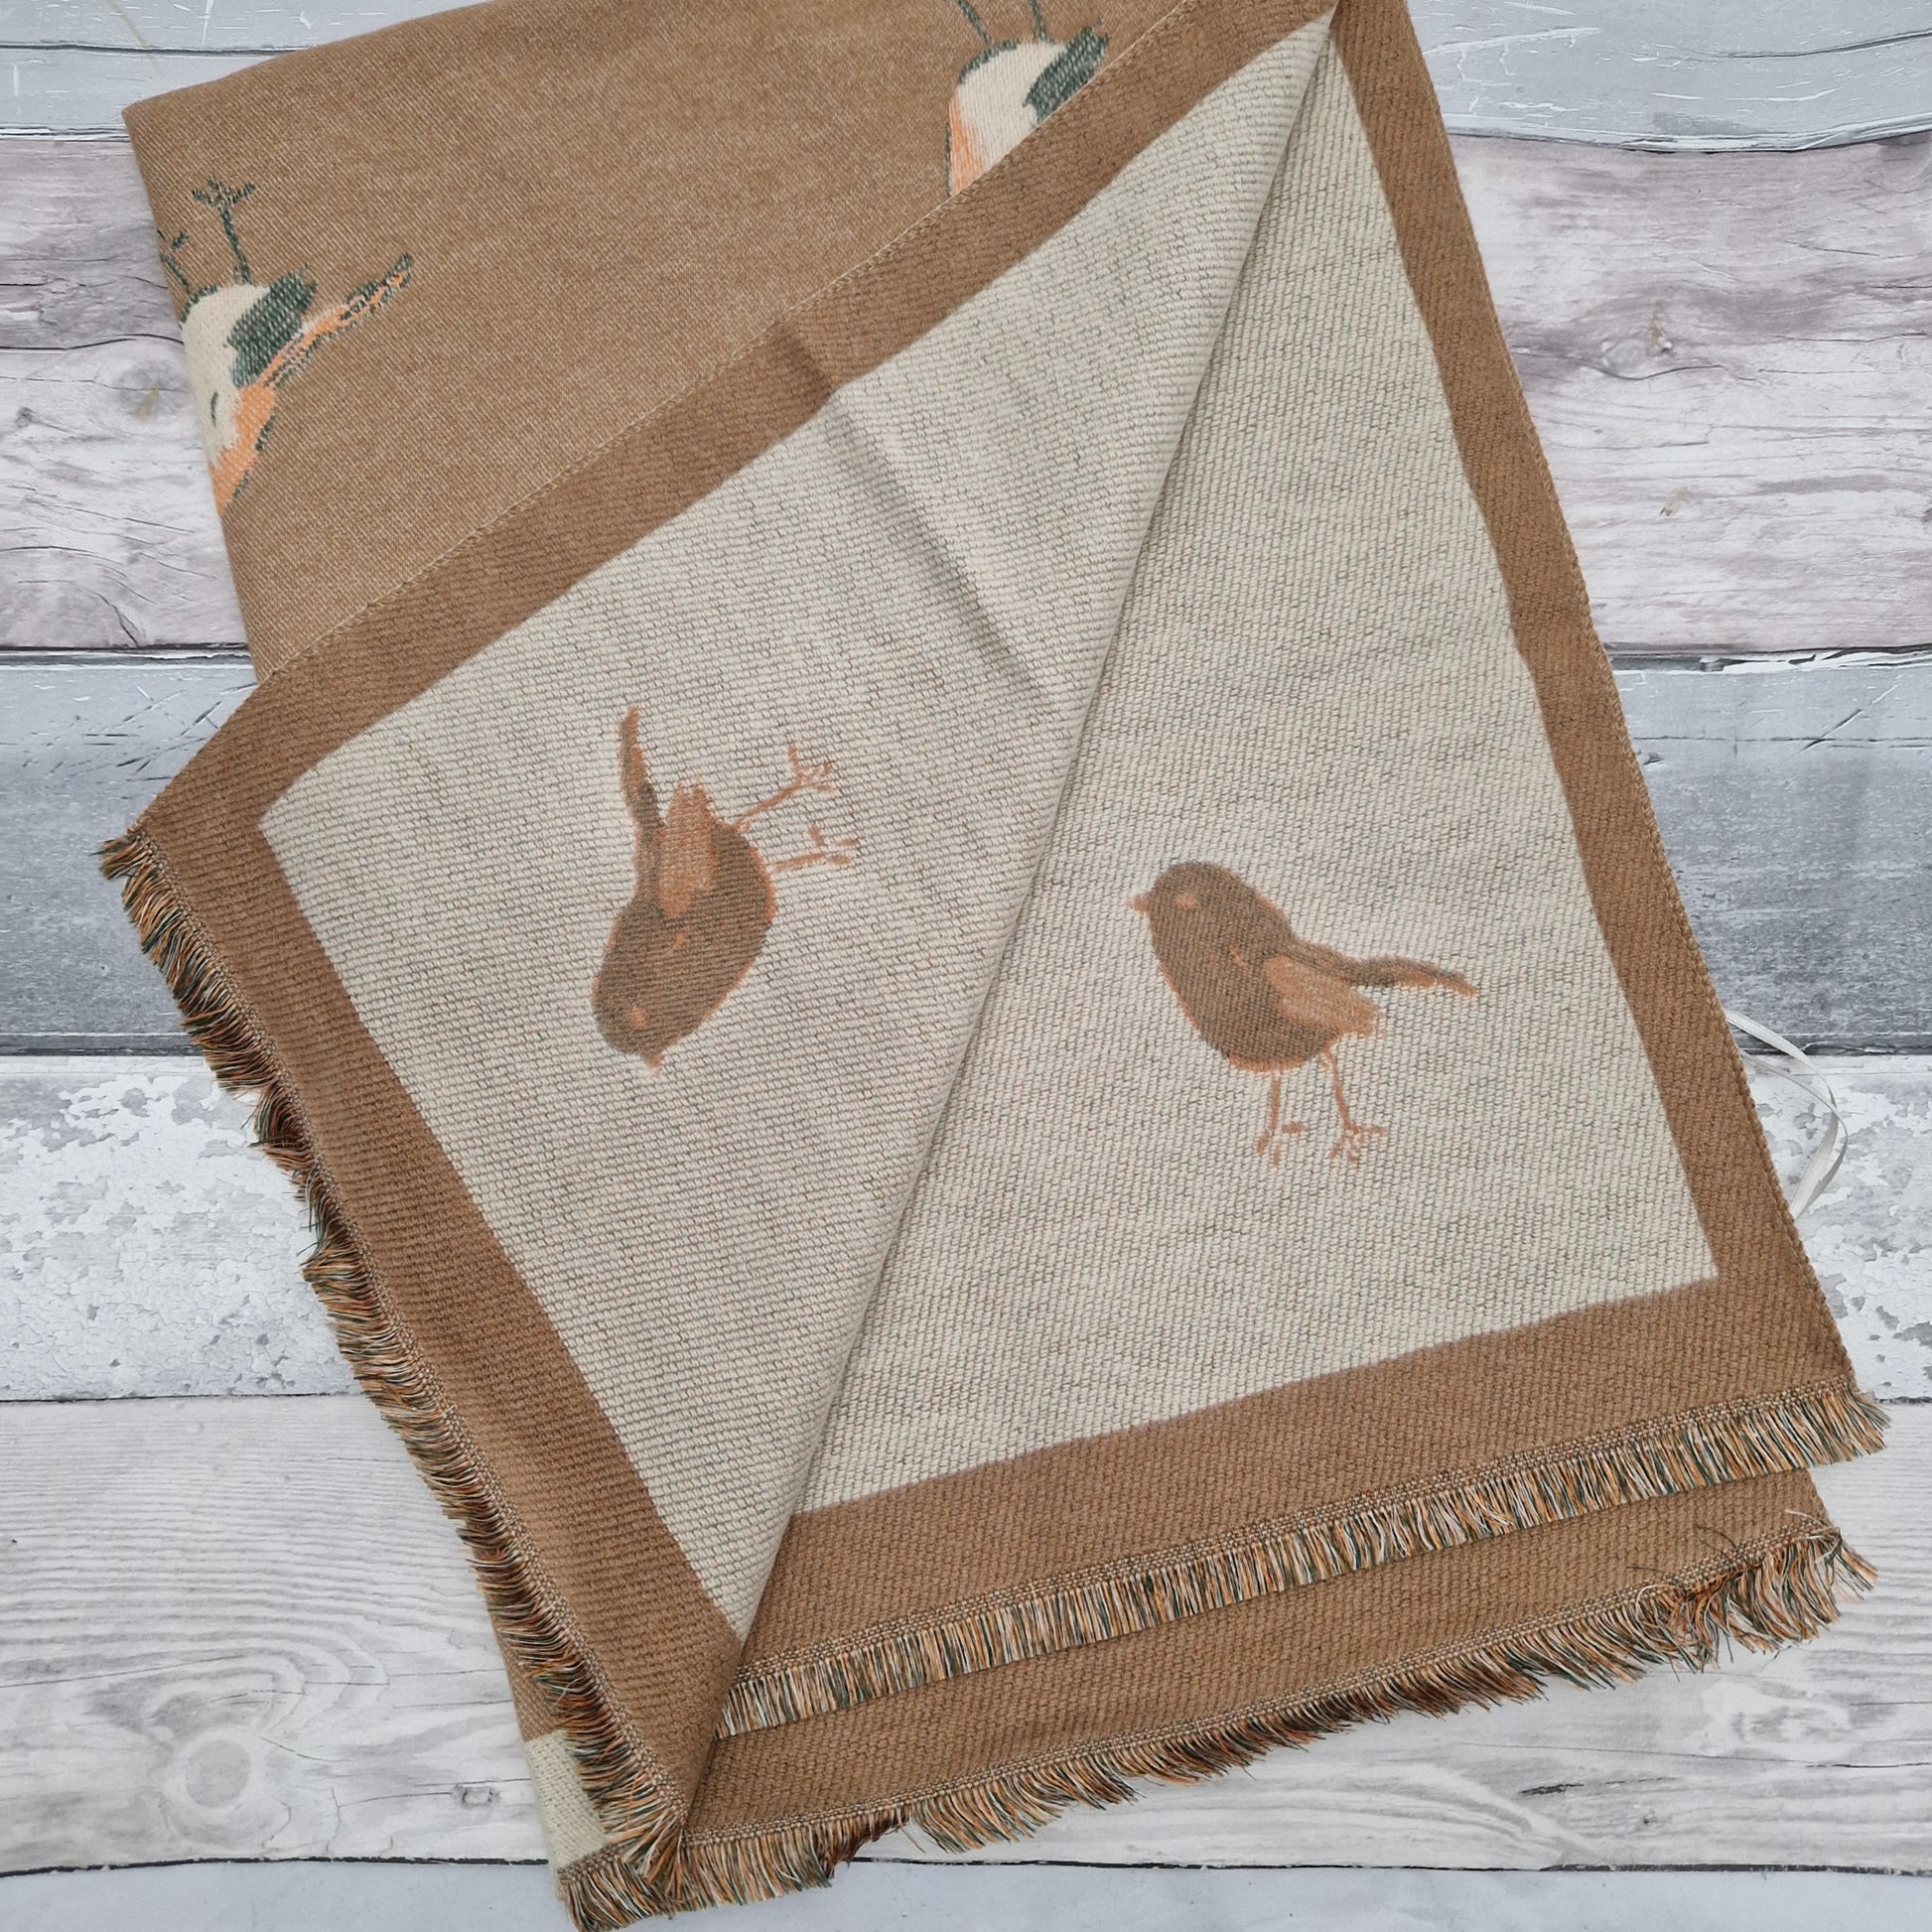 Beige coloured scarf decorated with Robins.